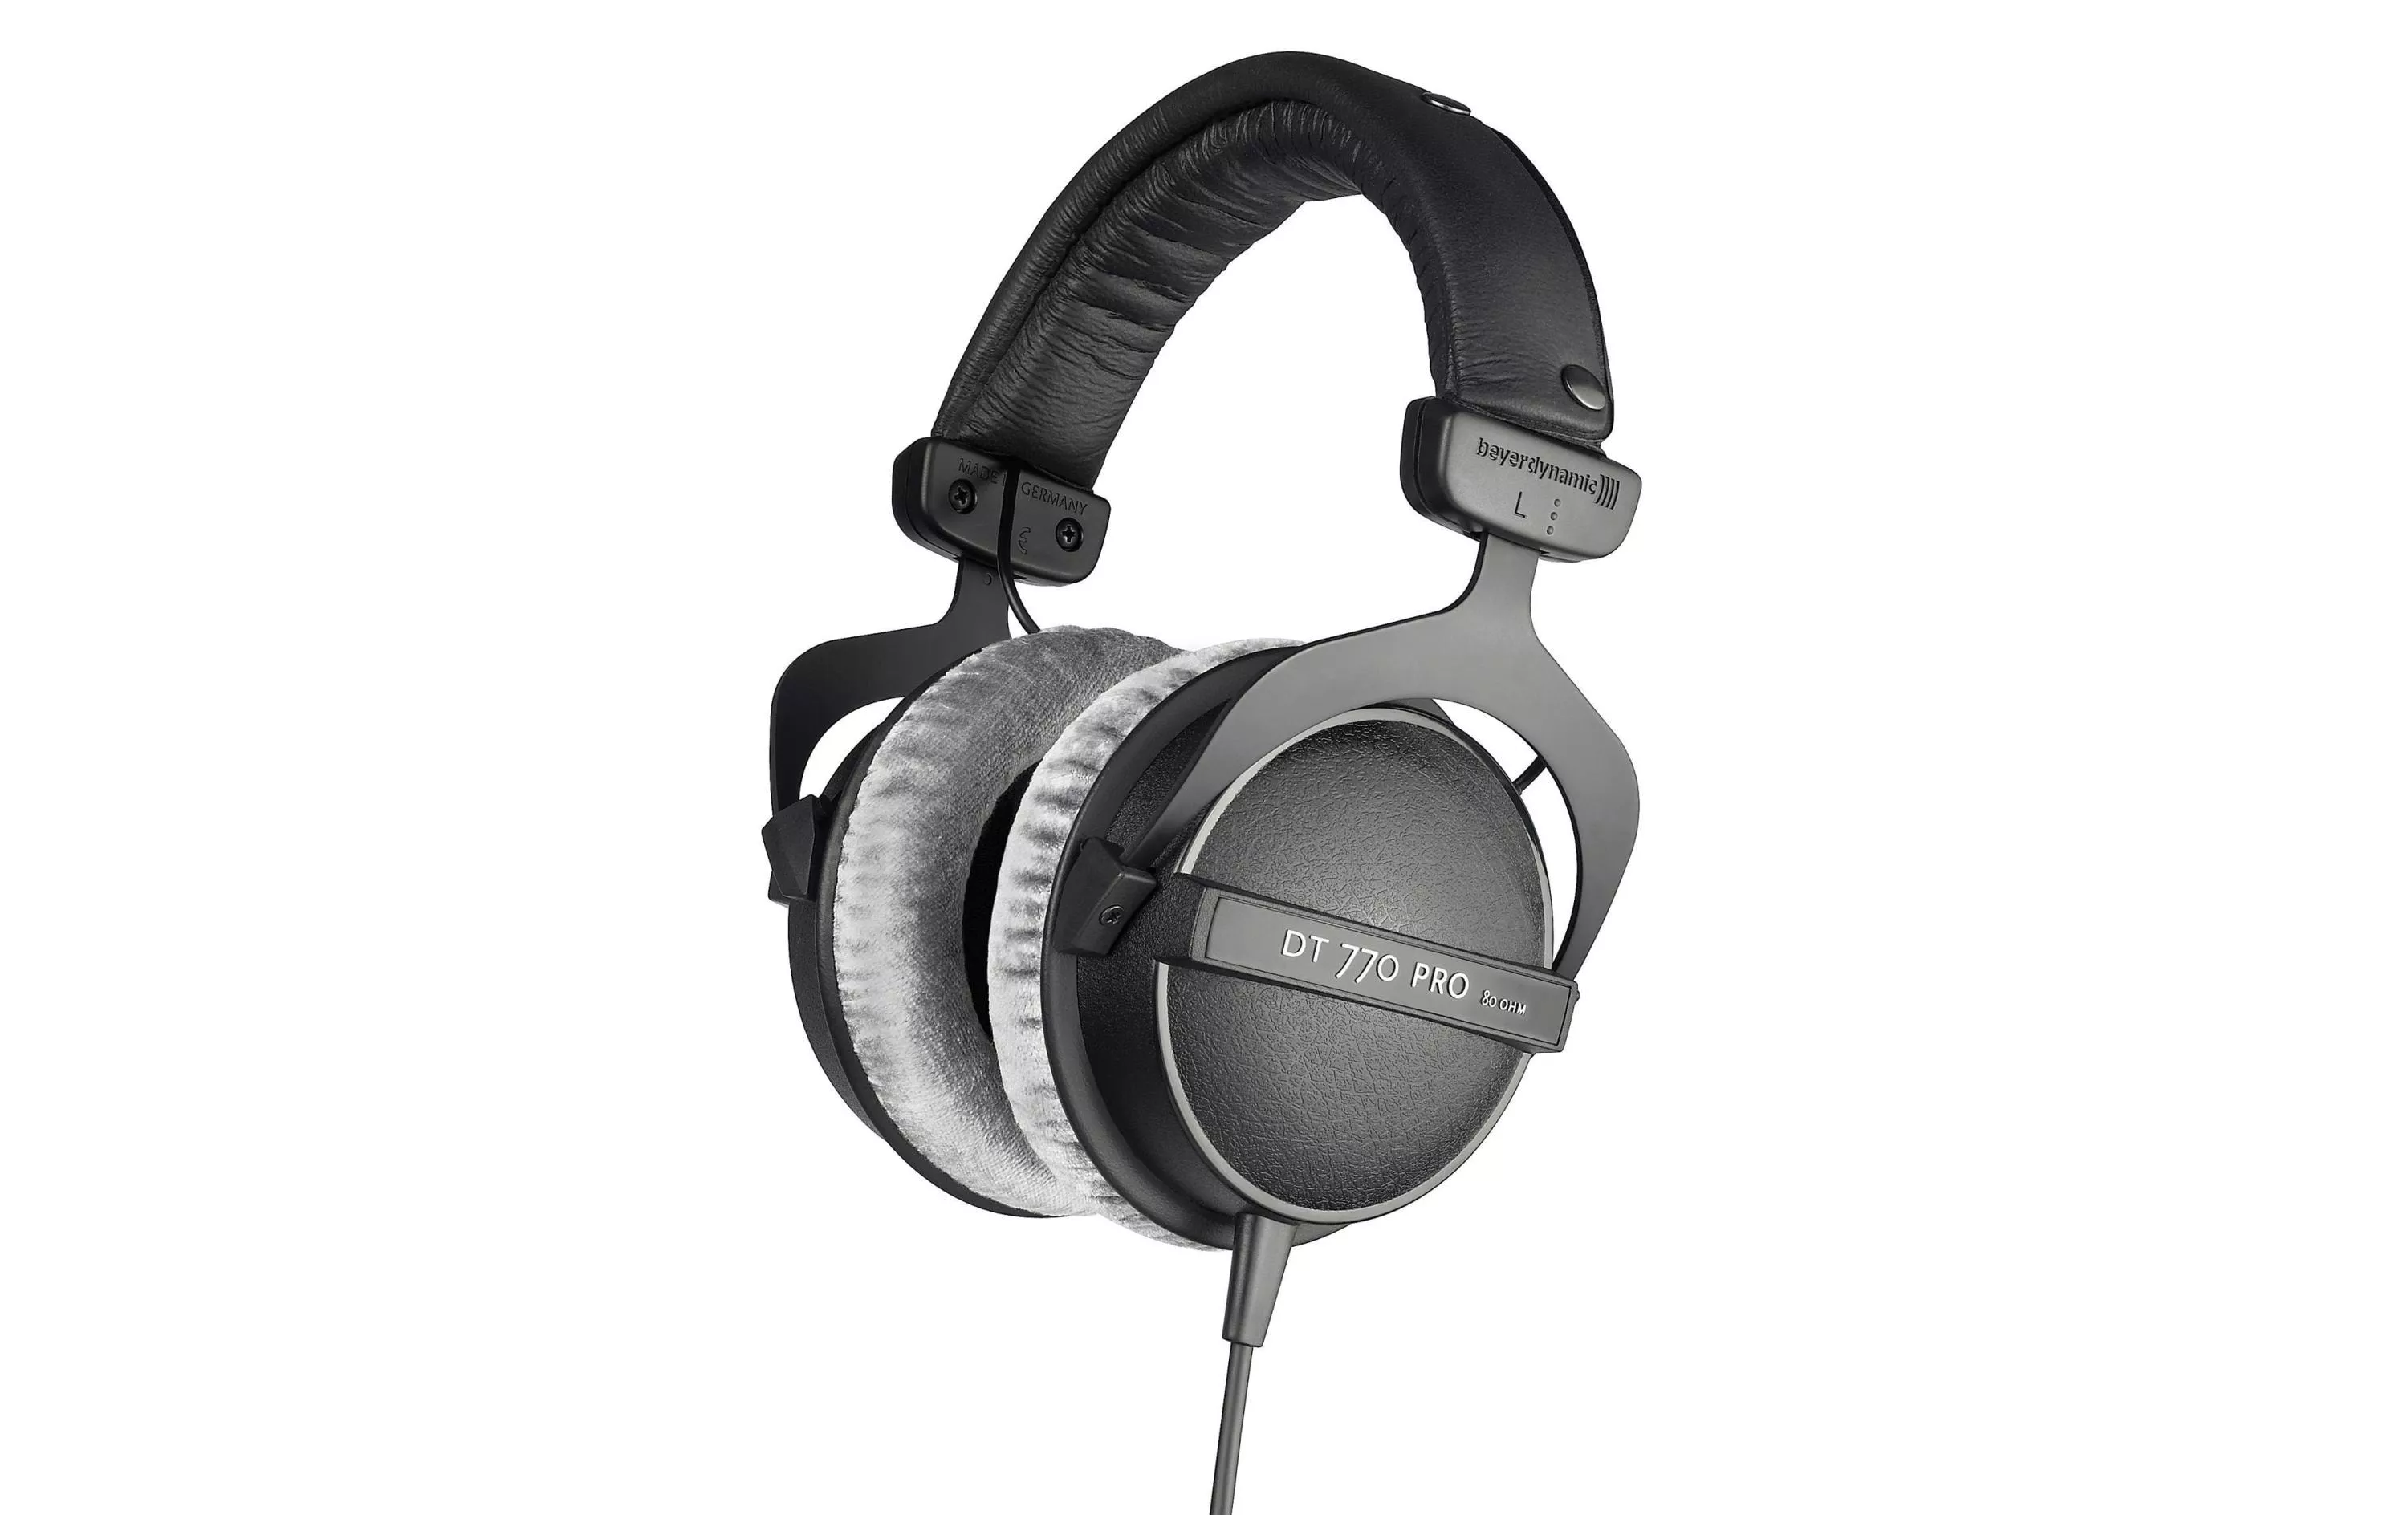 DT 770 Pro 80 Ω Cuffie over-ear, nero